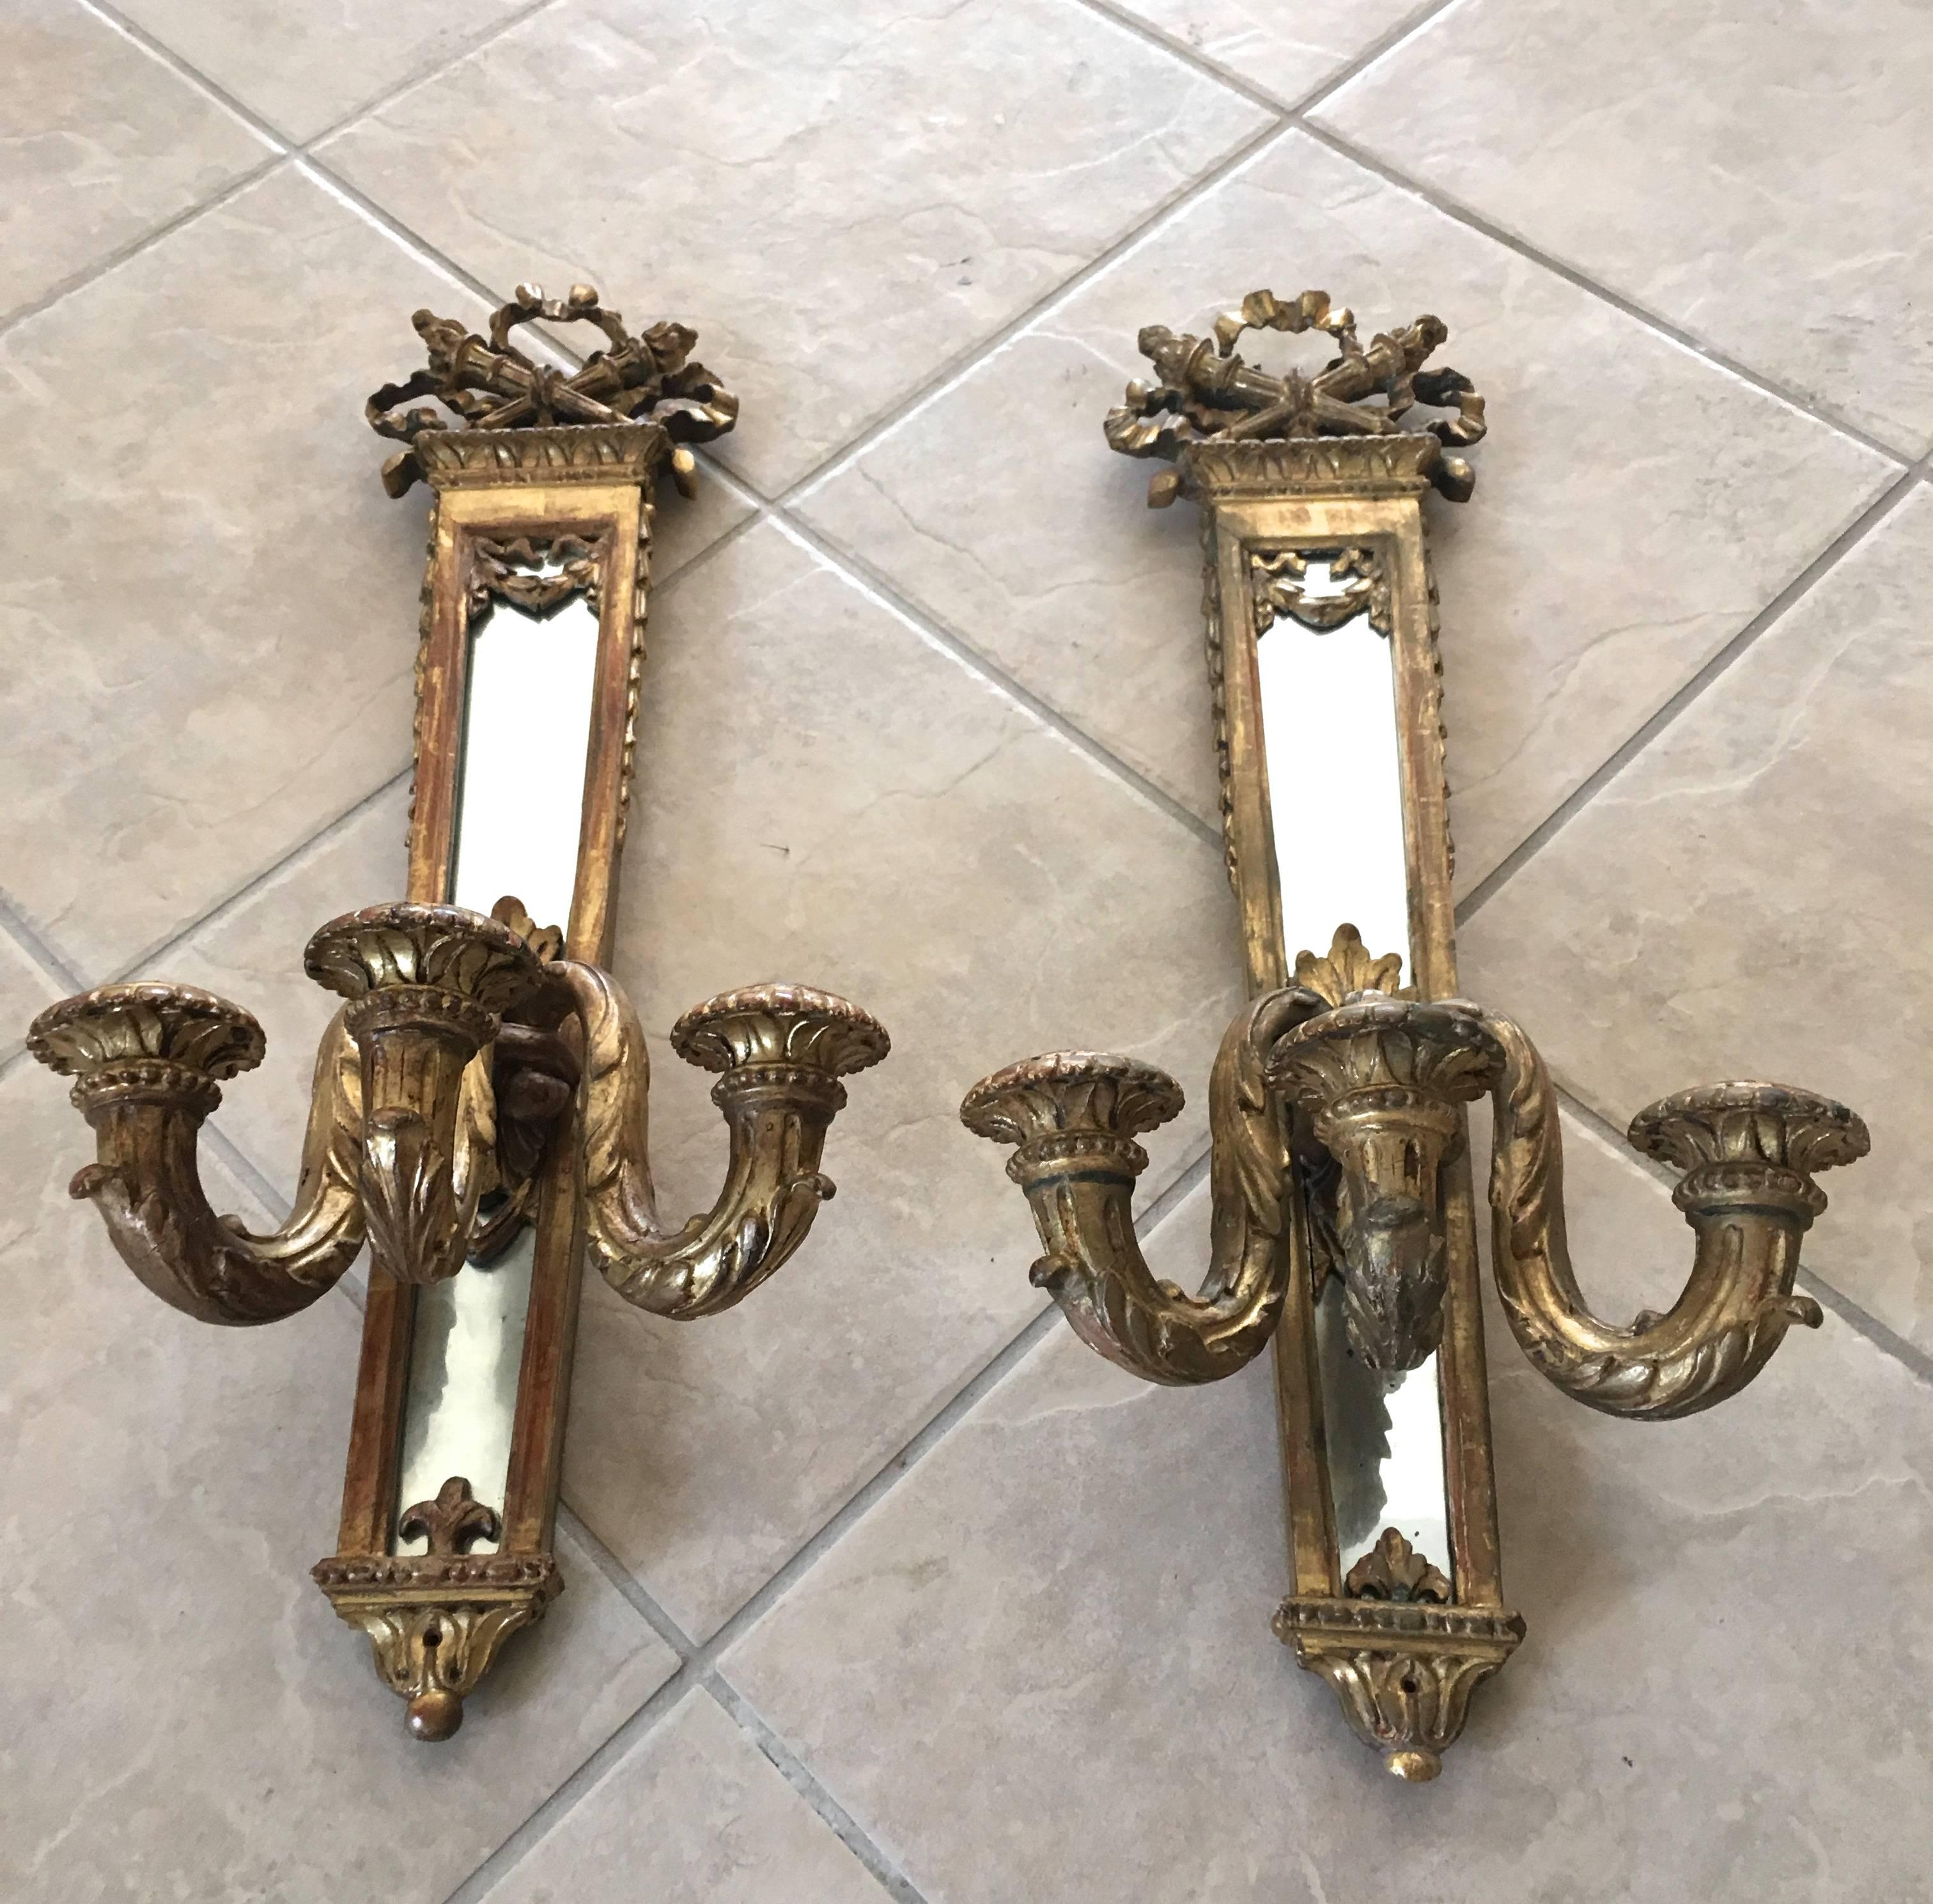 Pair of 19th century water gilt Louis XVI style three candle mirrored wall sconces (not electrified).